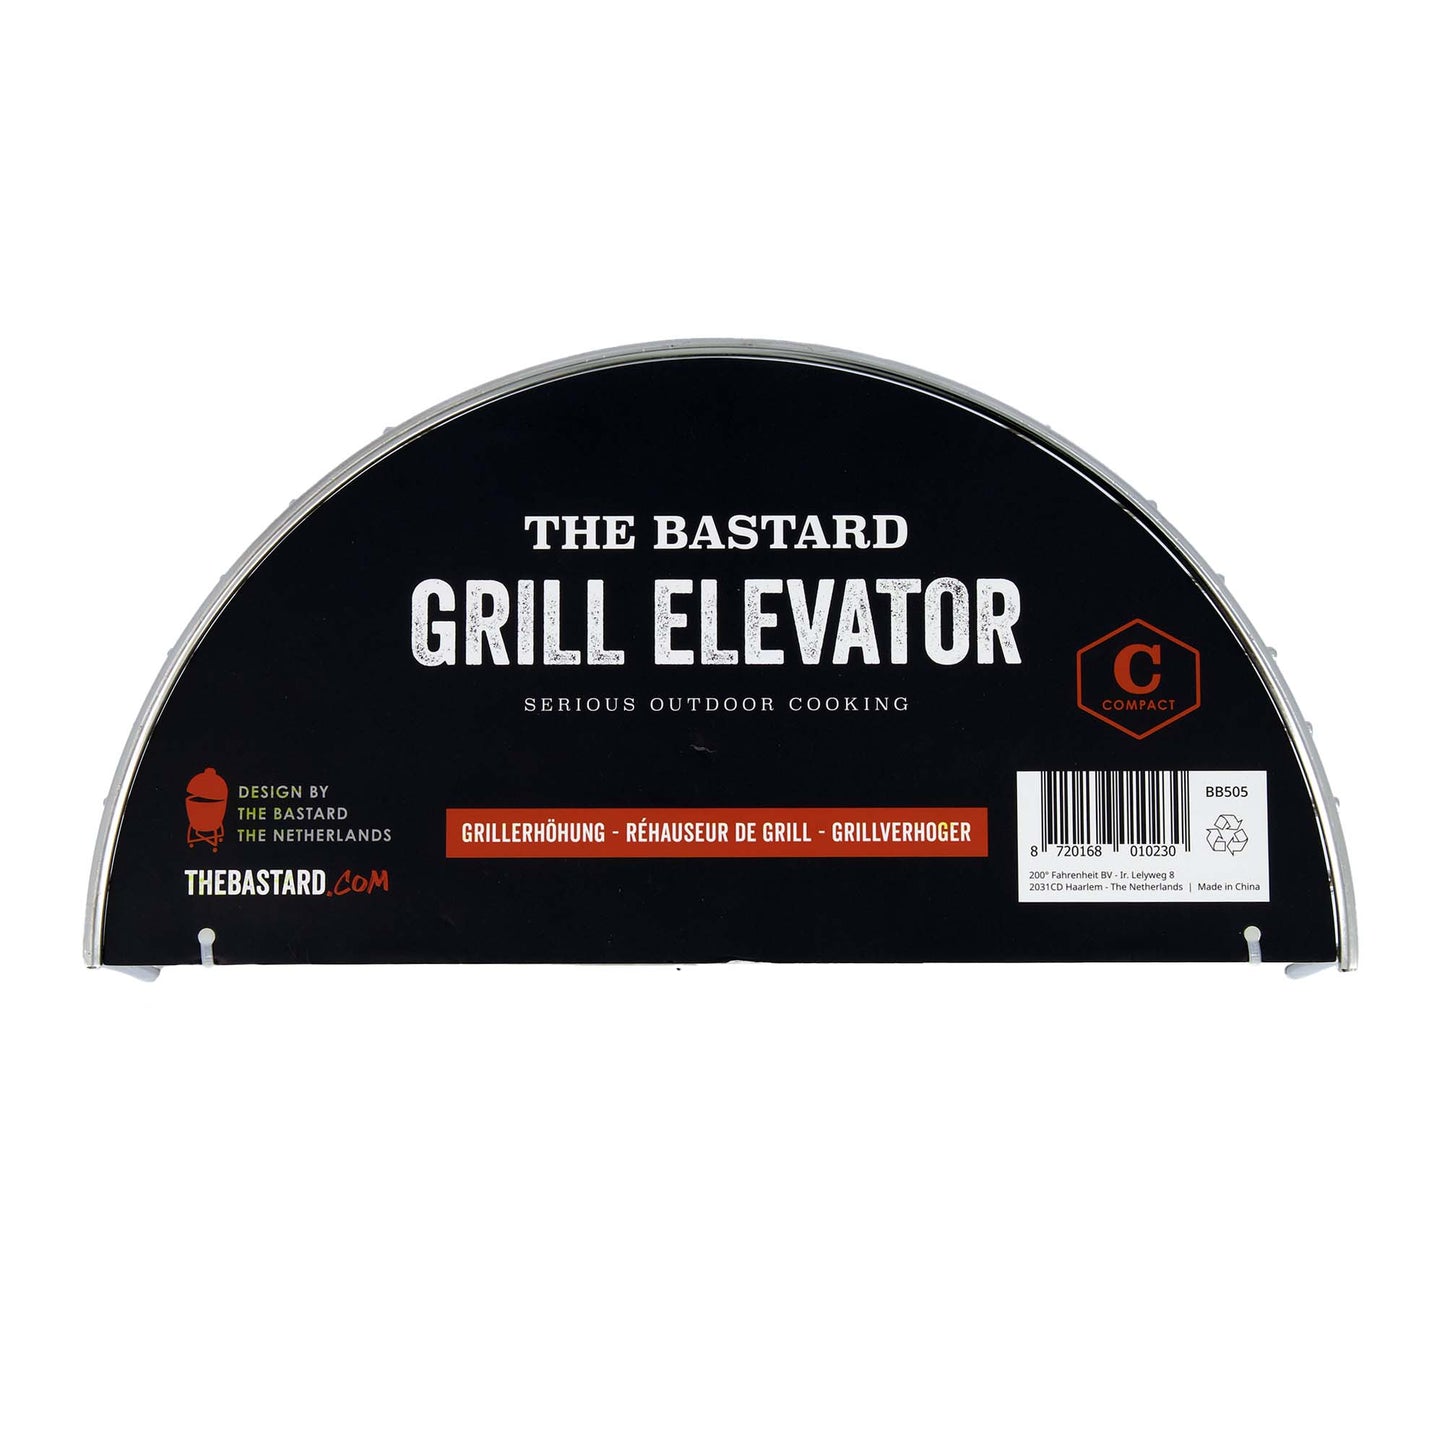 The Bastard Grill Elevator - Compact